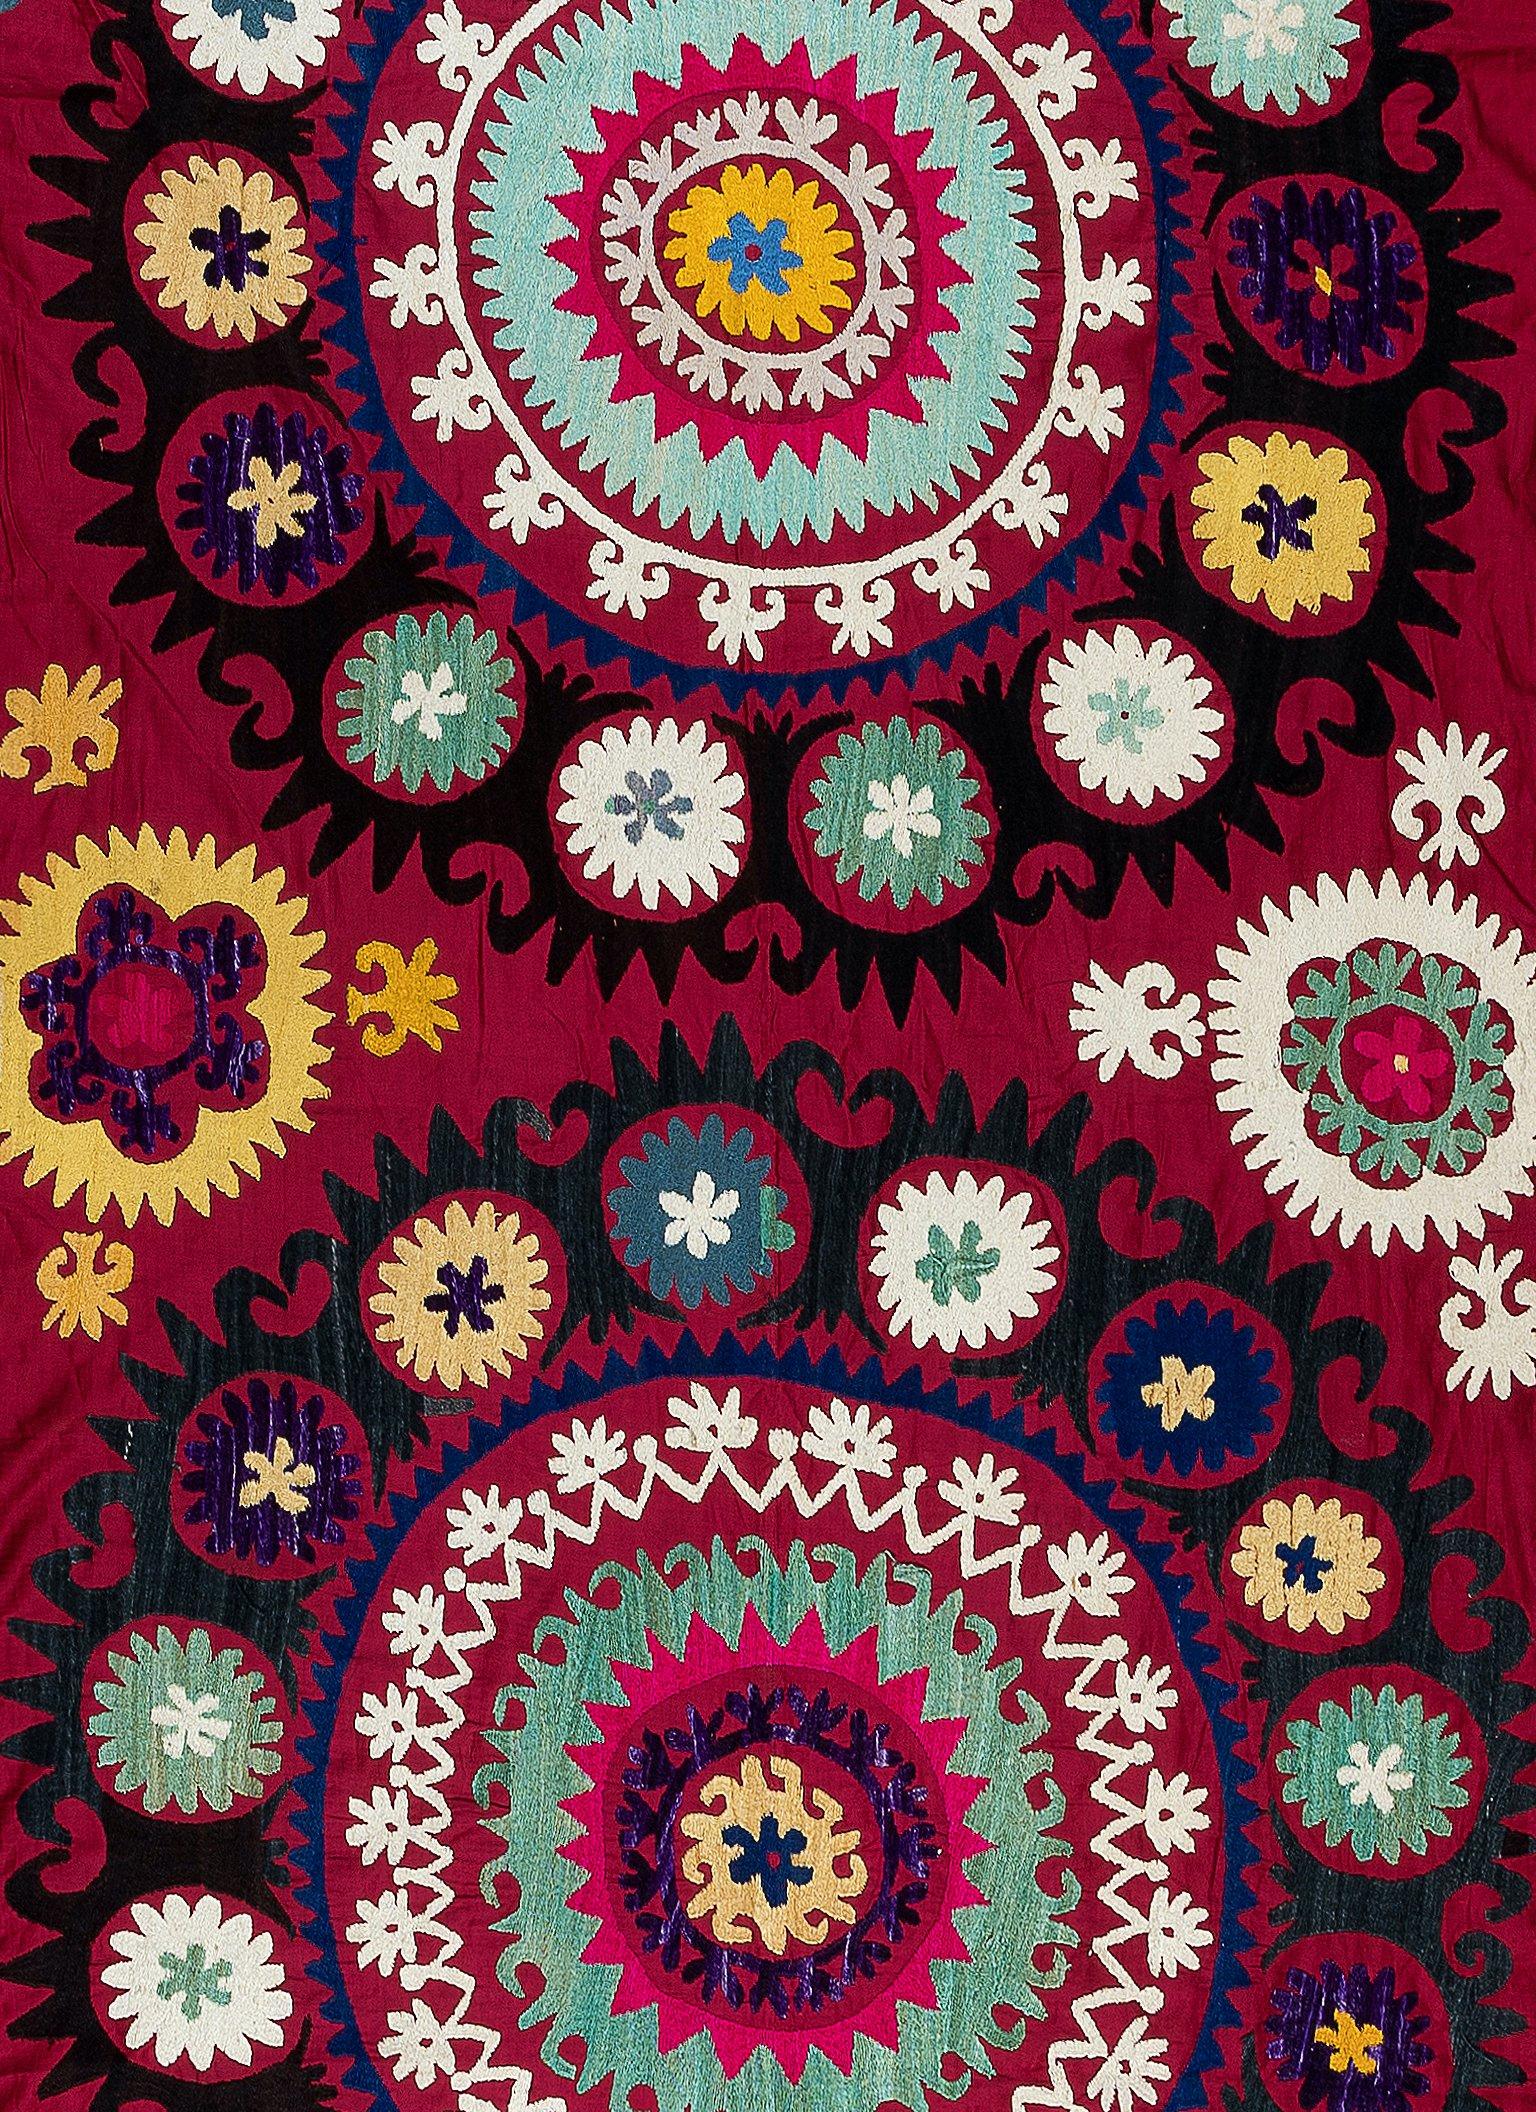 1970s Uzbek Silk Embroidery Wall Hanging, Red Suzani Fabric Bedspread In Good Condition For Sale In Philadelphia, PA